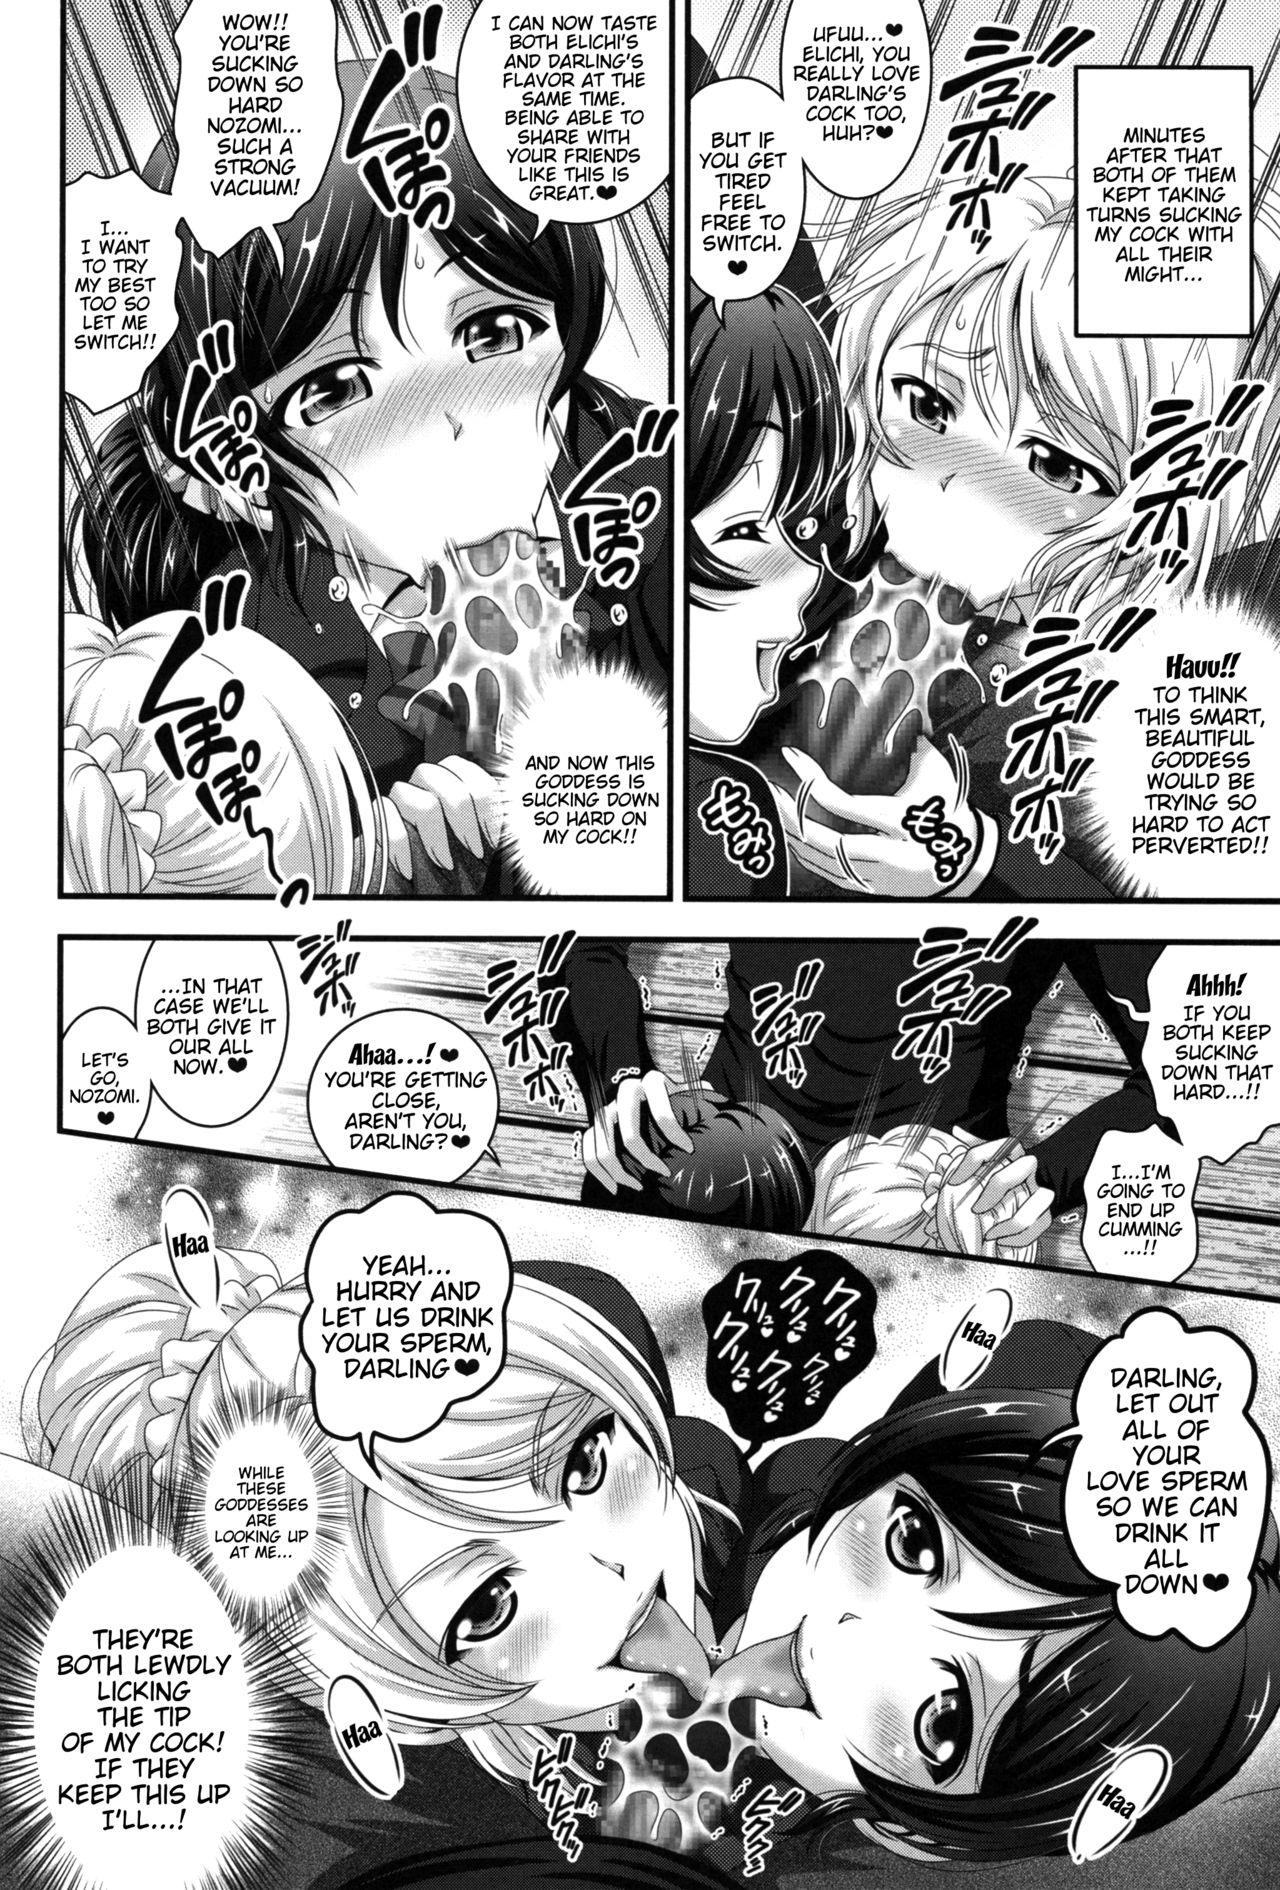 Groupsex Ore Yome Saimin 1 - Love live Sissy - Page 13